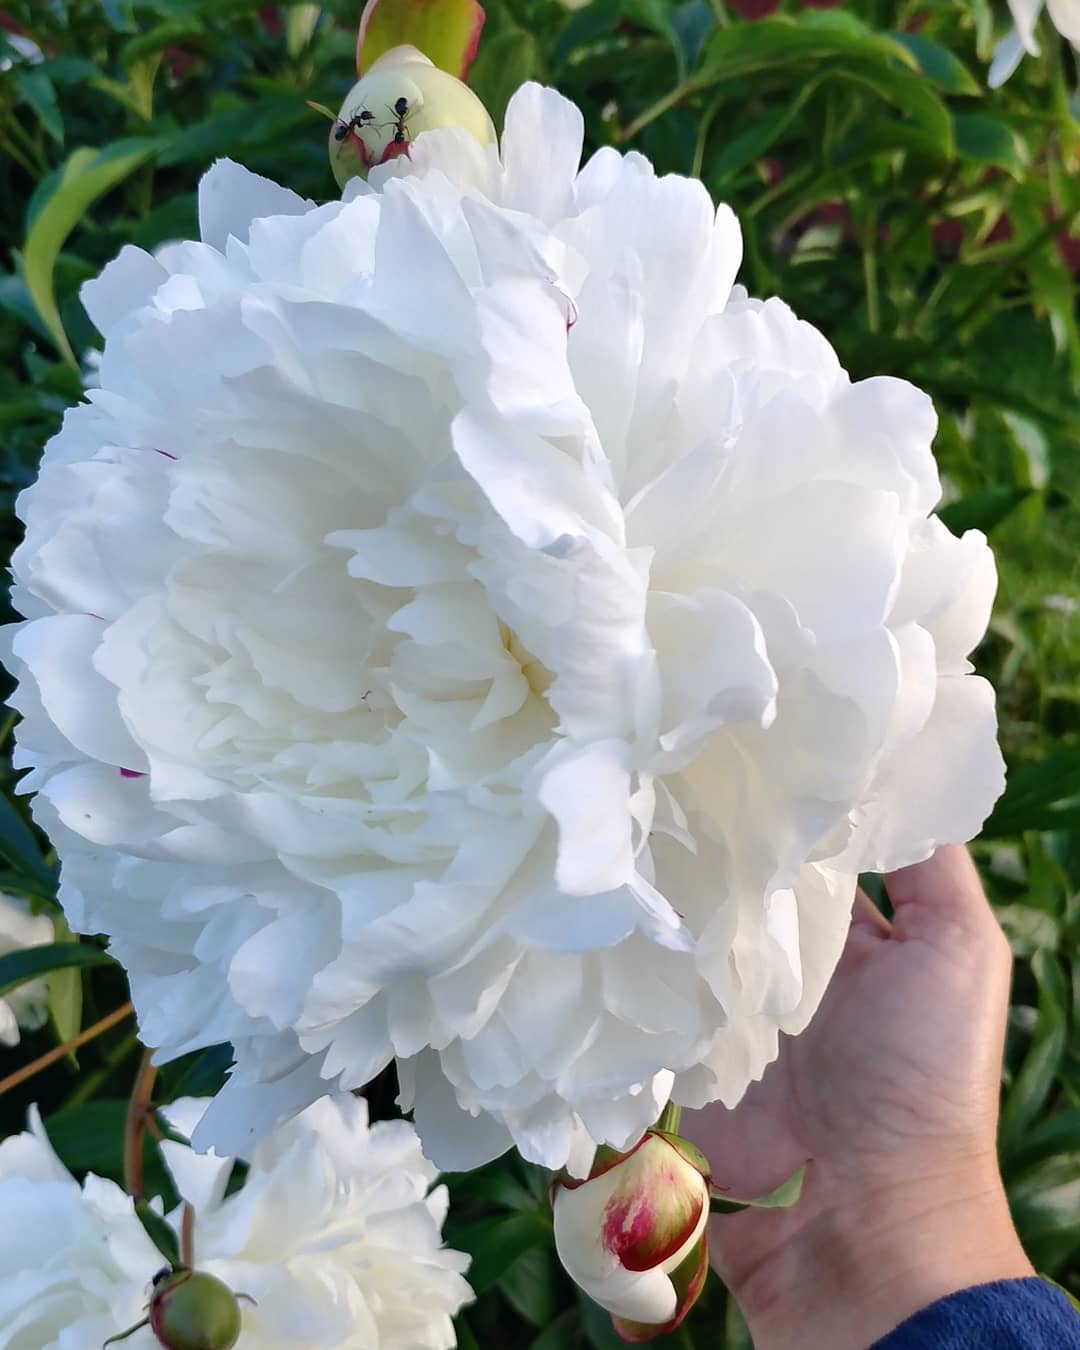 In addition to friendly sheep, our also had an enormous Check out the size of these blooms! Can you see the two ants? The formations in the last picture are the at